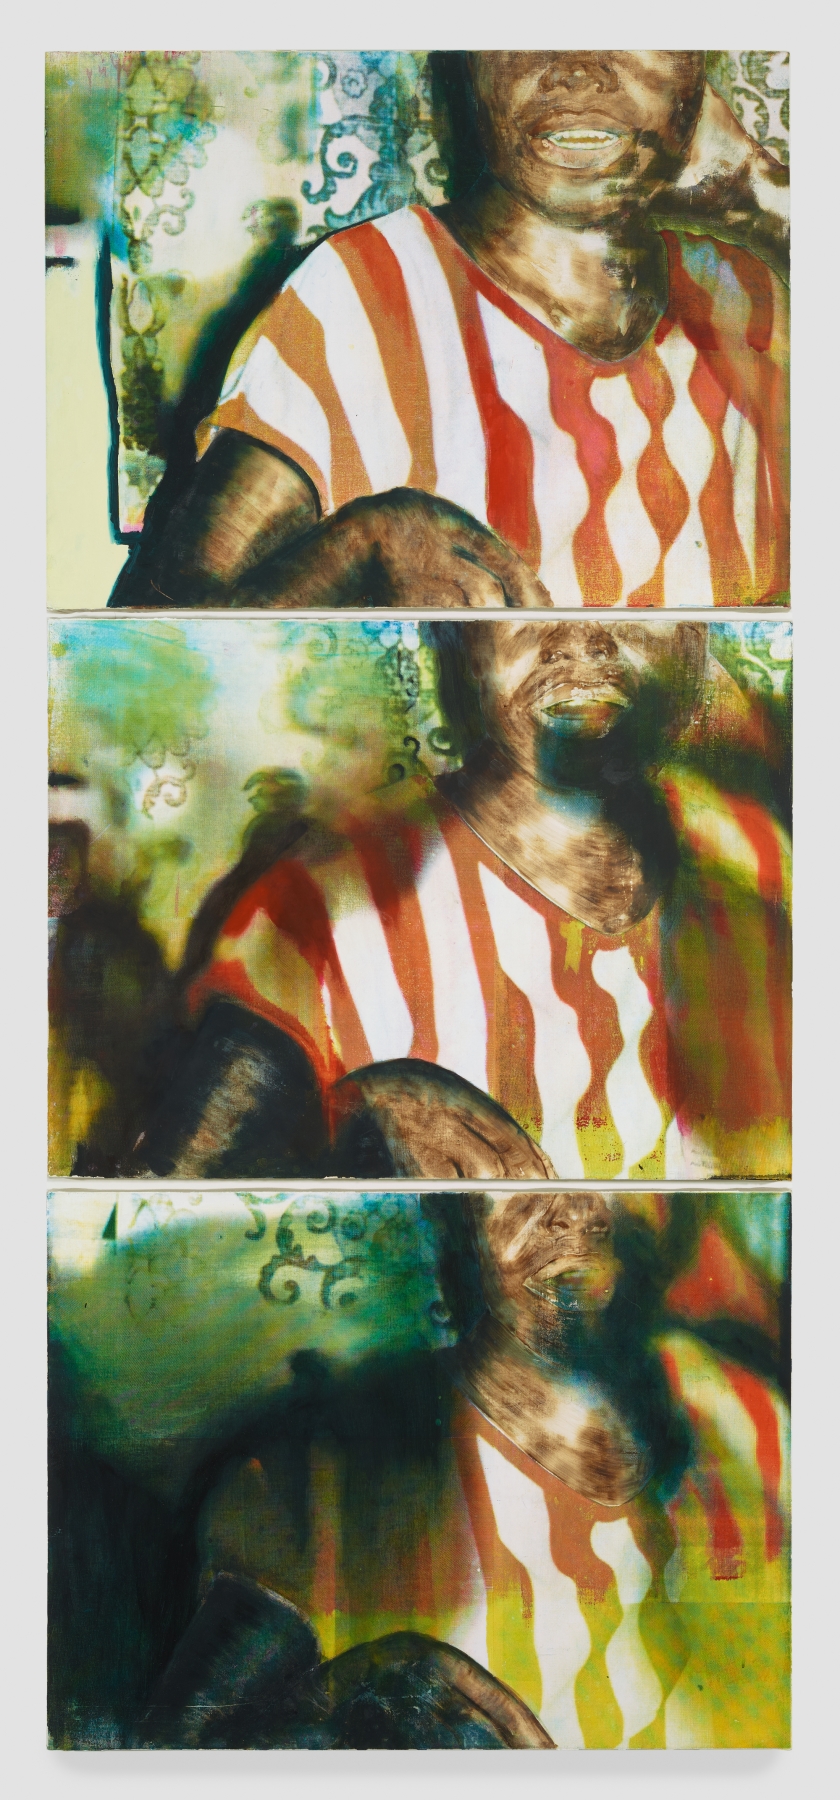 Africanus Okokon
Life&amp;rsquo;s a Gas (Verbatim 3 triptych), 2022
Silkscreen ink, burn marks, and oil on canvas
92 x 40 inches

&amp;nbsp;